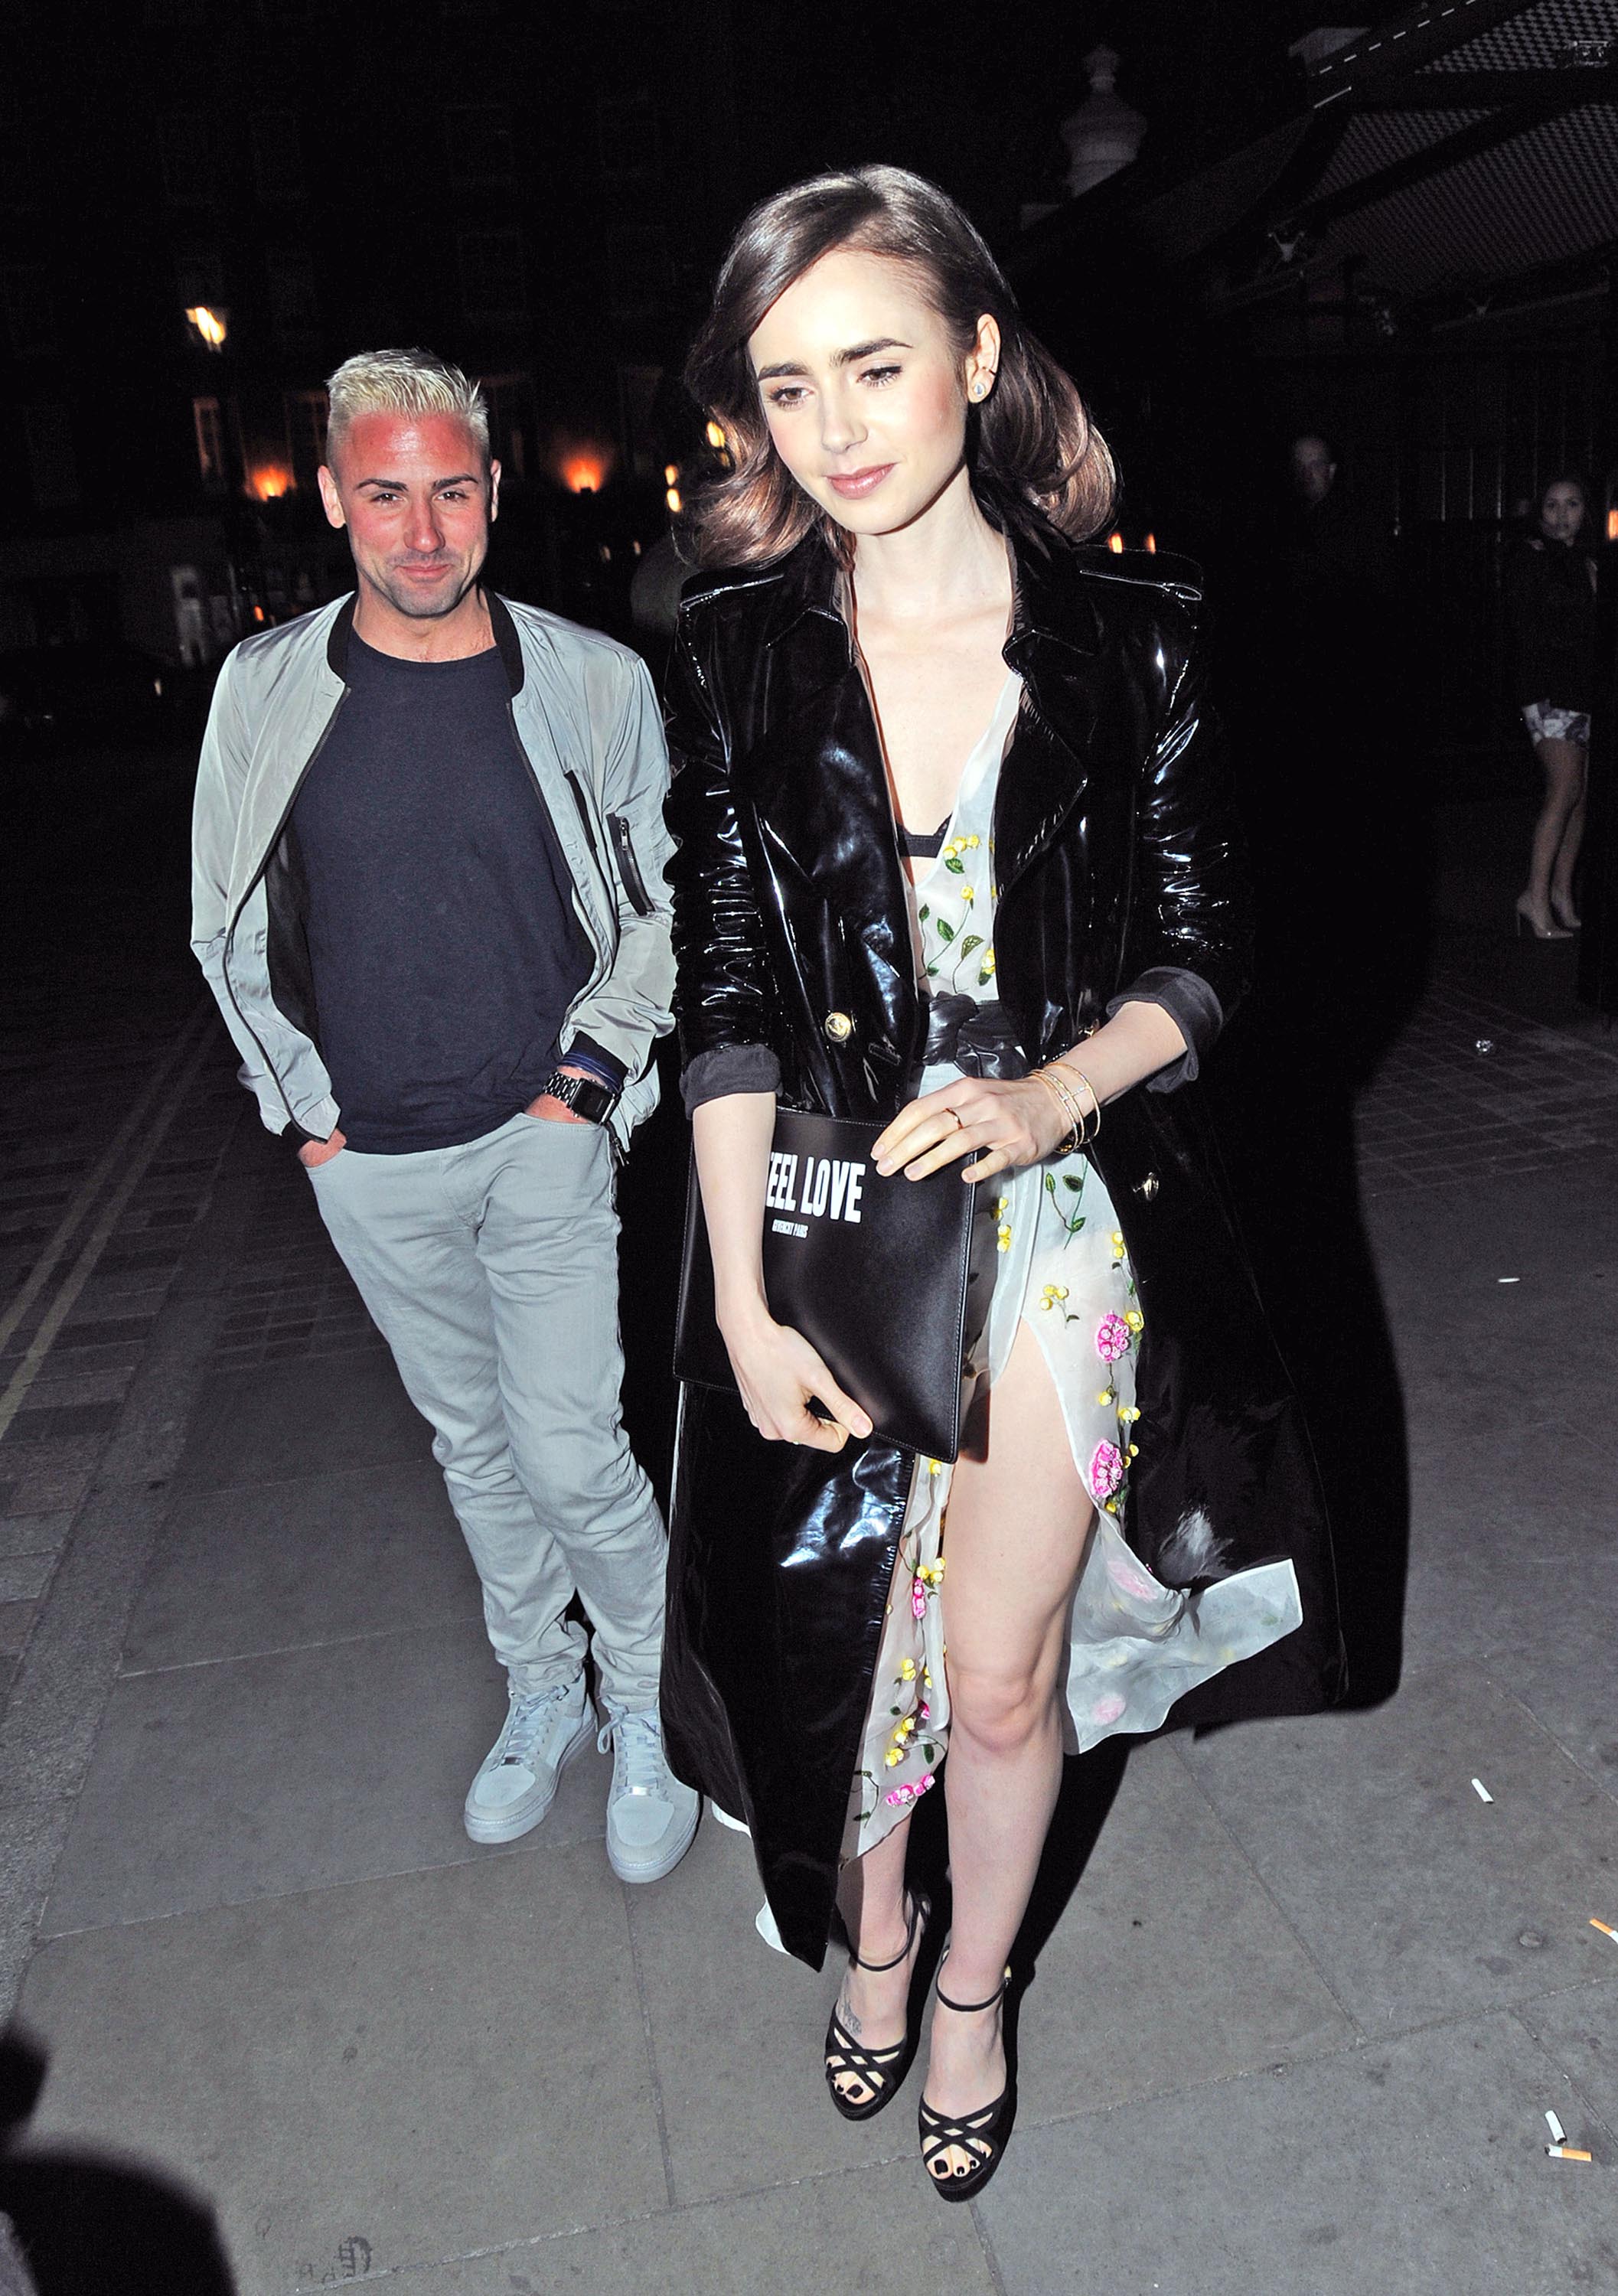 Lily Collins dined out at Chiltern Firehouse